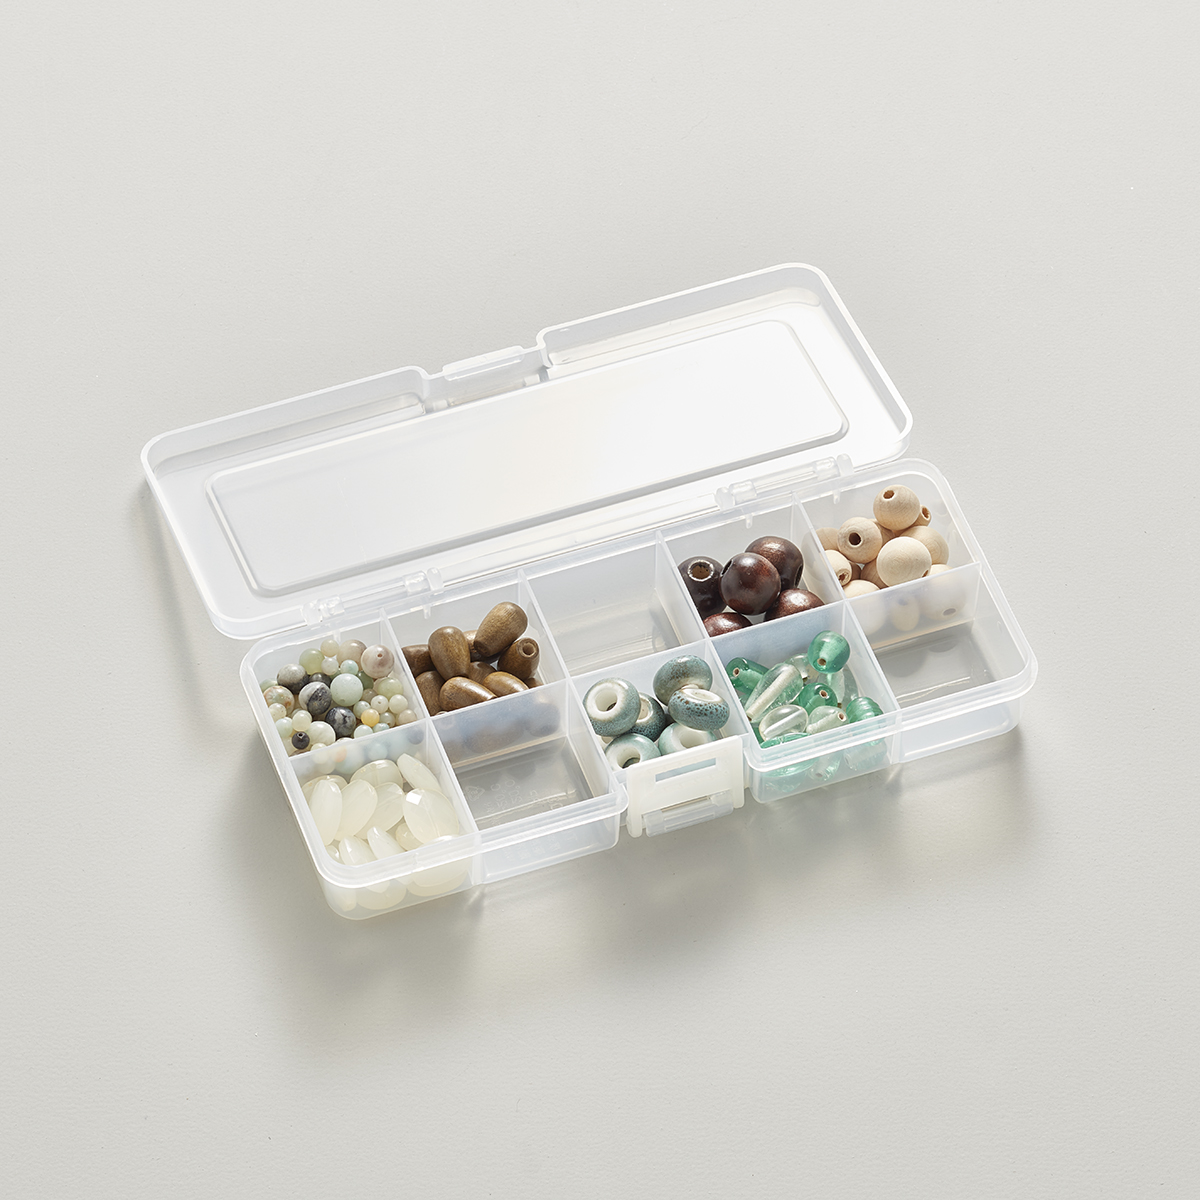 https://www.containerstore.com/catalogimages/466657/10051811-small-10-compartment-box-tr.jpg